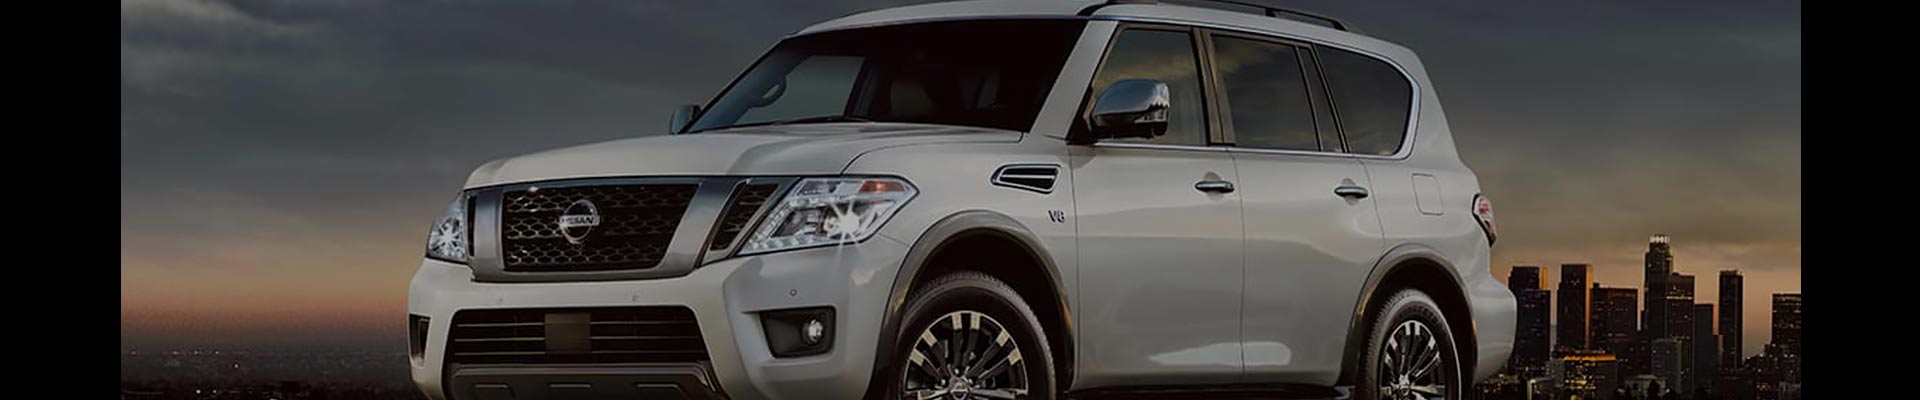 Shop Replacement and OEM 2020 Nissan Armada Parts with Discounted Price on the Net